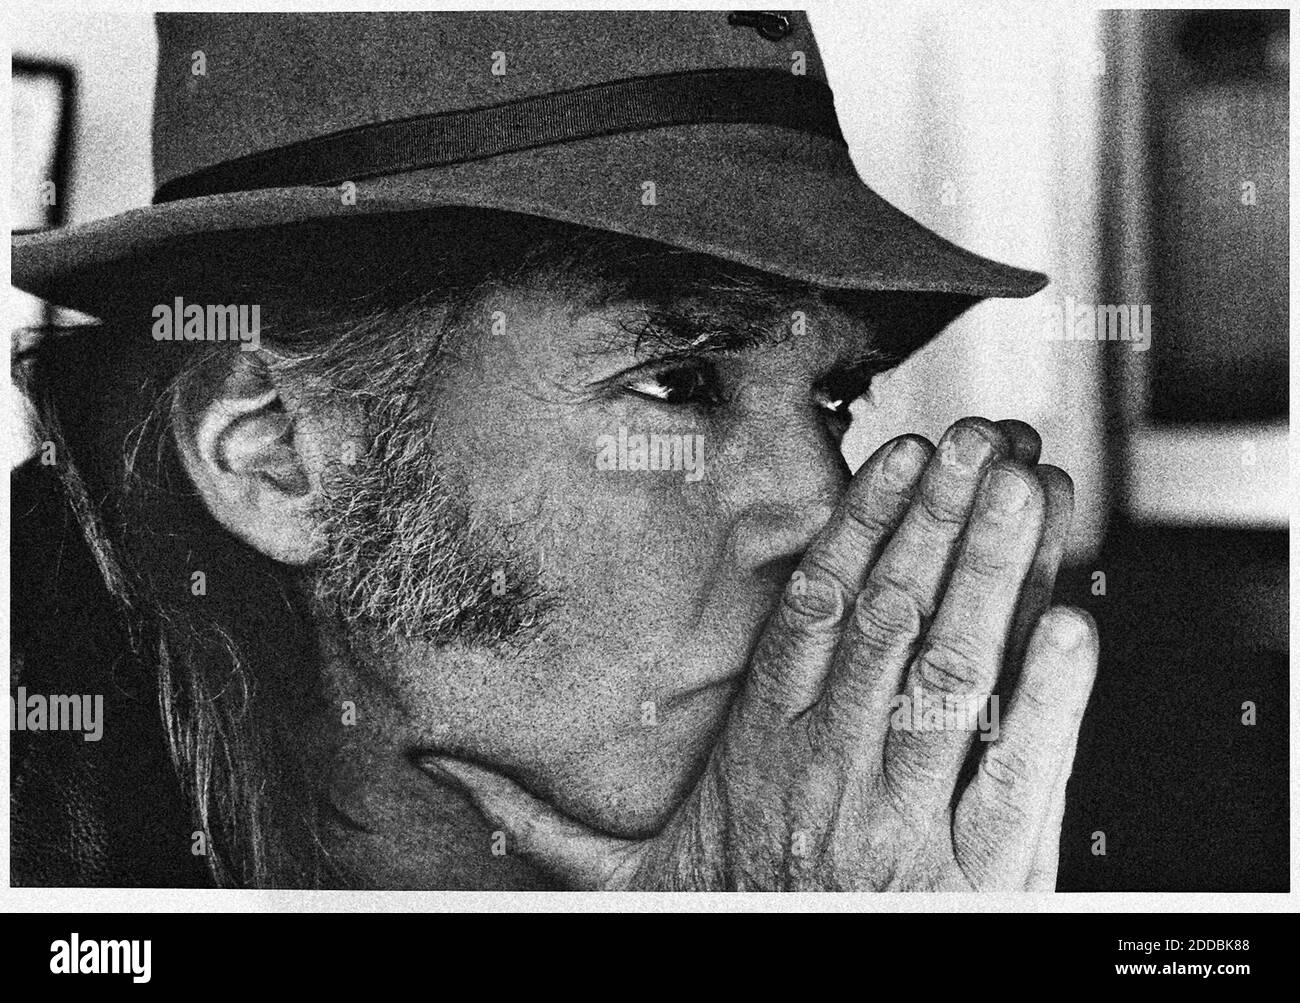 NO FILM, NO VIDEO, NO TV, NO DOCUMENTARY - Legendary Rock Star Neil Young pictured on September 22, 2005 in USA. Photo by Pegi Young/Philadelphia Inquirer/KRT/ABACAPRESS.COM. Stock Photo